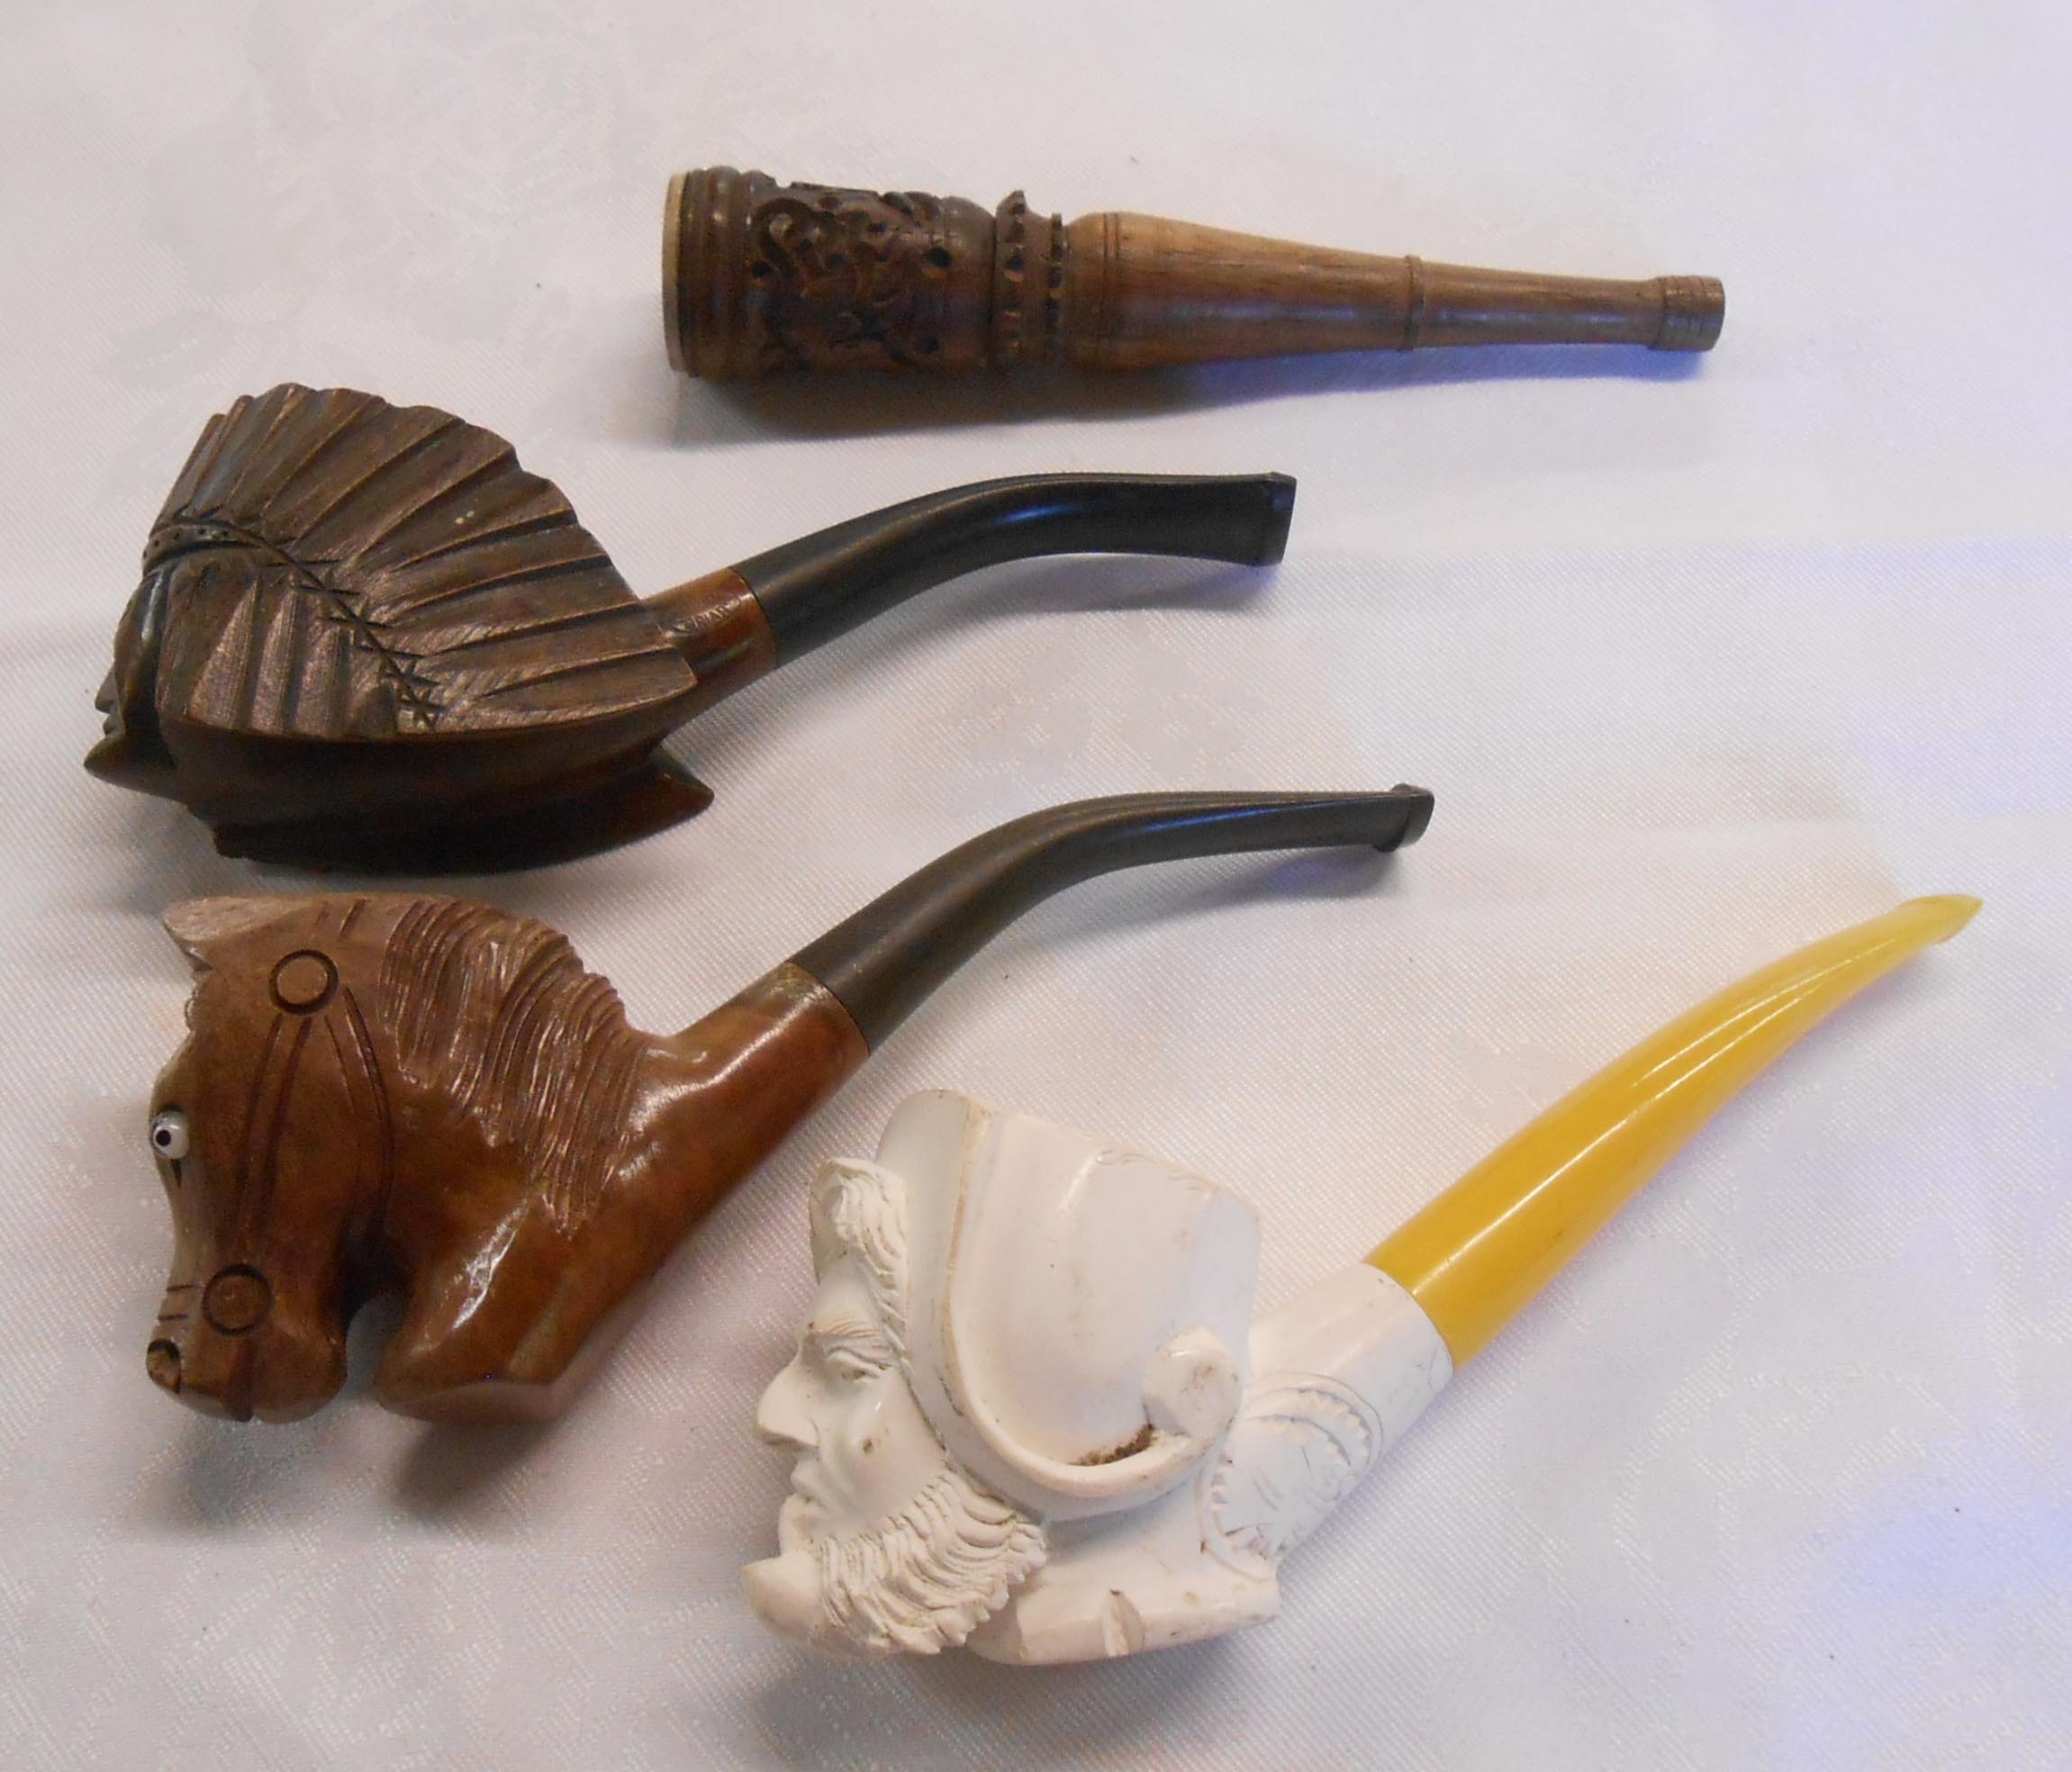 A Meerschaum pipe carved as a man smoking a pipe with amber stem - sold with a carved briar wood